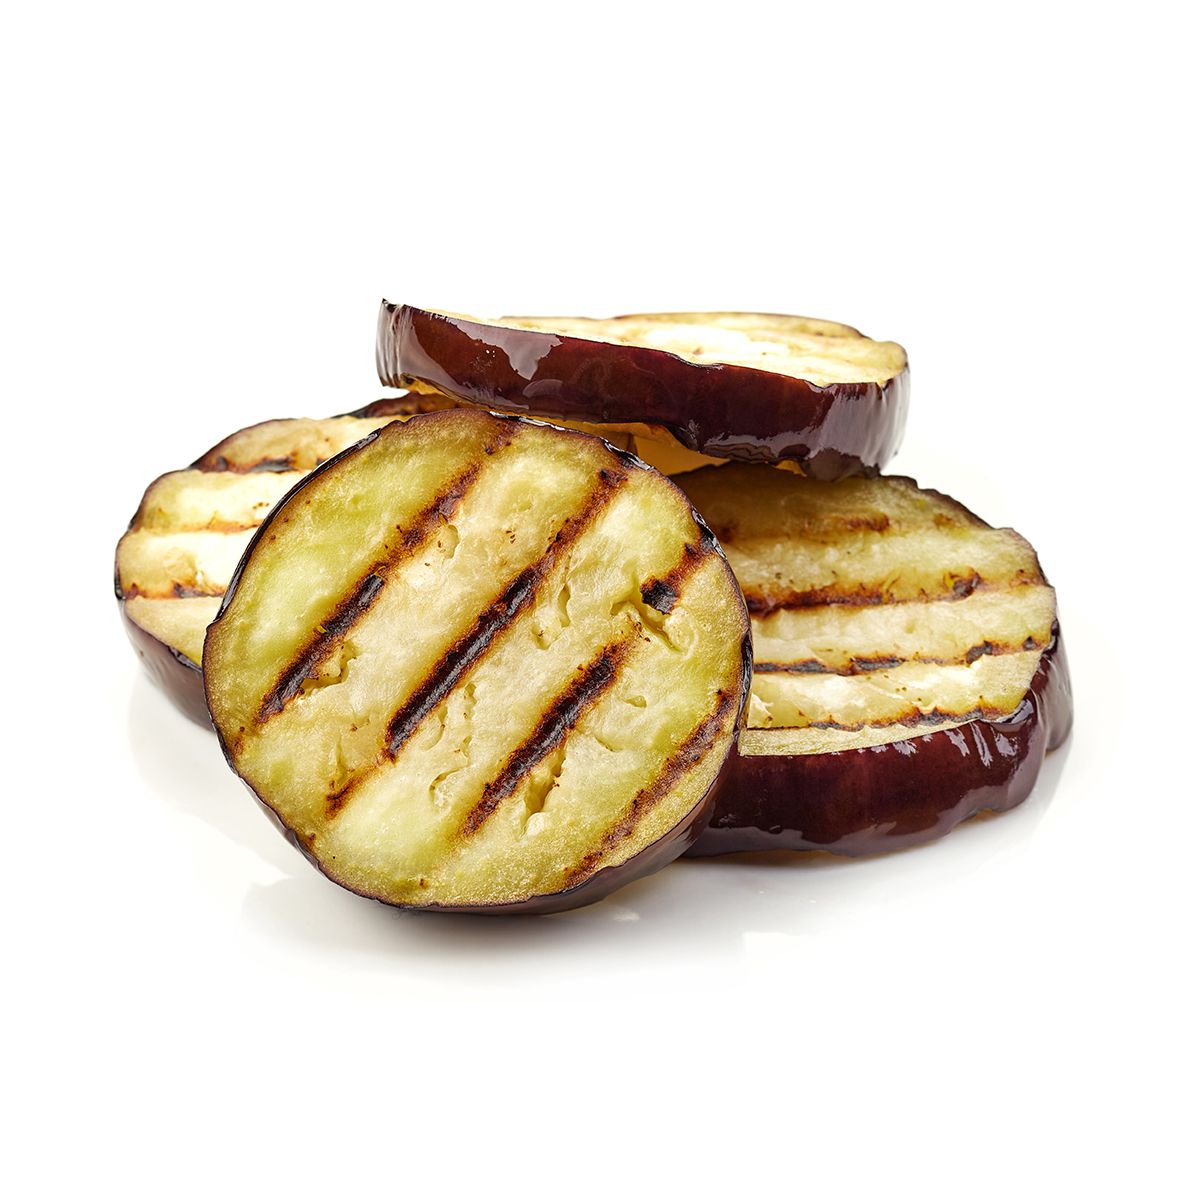 Ortoconserviera Grilled Eggplant Tray